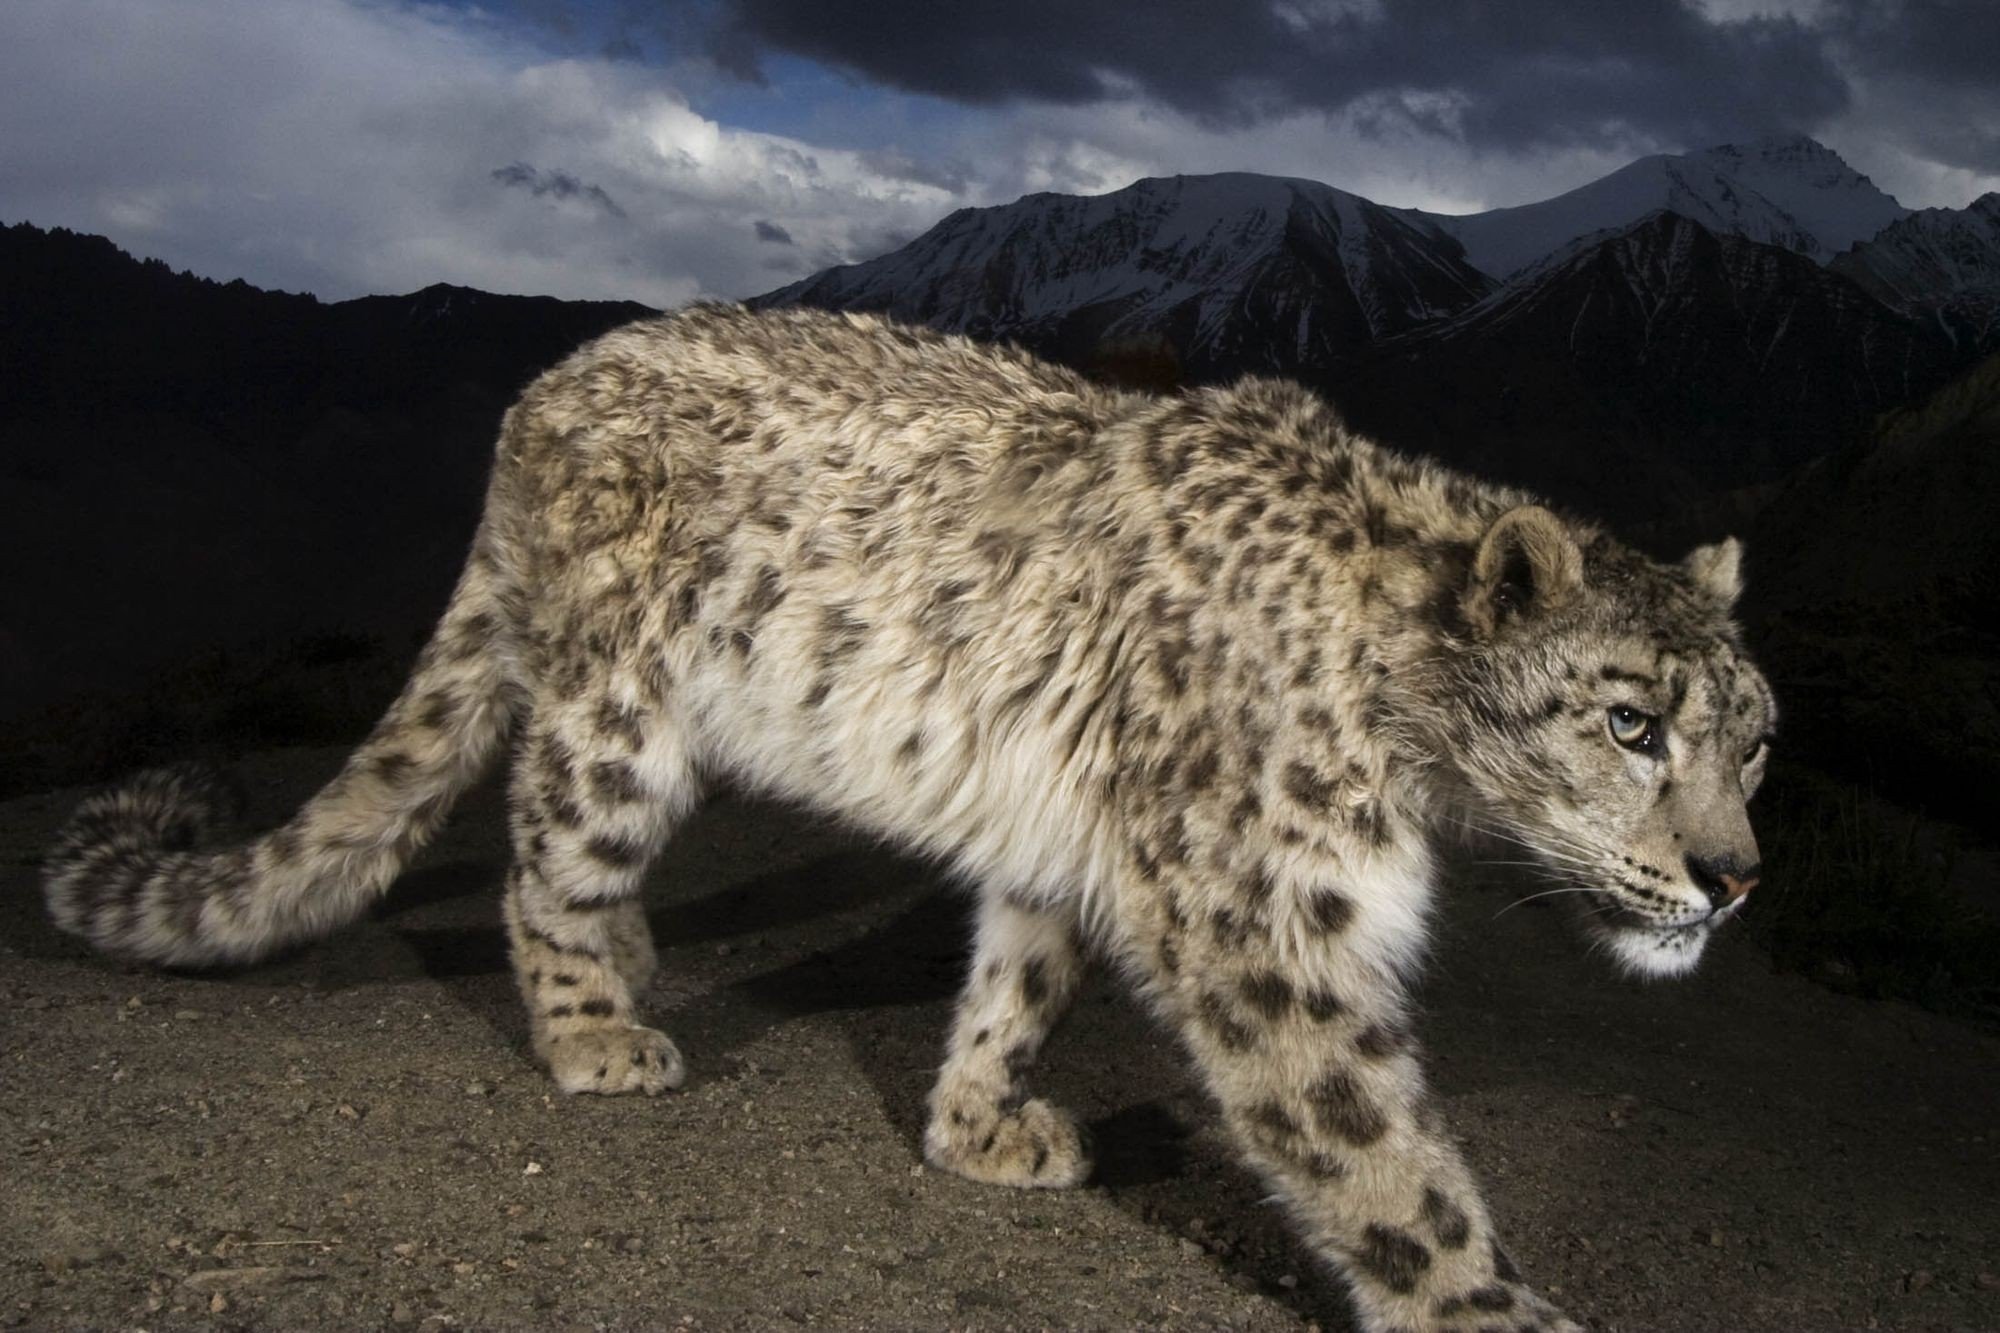 A remote camera captures a snow leopard at Hemis National Park in Ladakh, in India’s Jammu and Kashmir state. Photo: Steve Winter/National Geographic